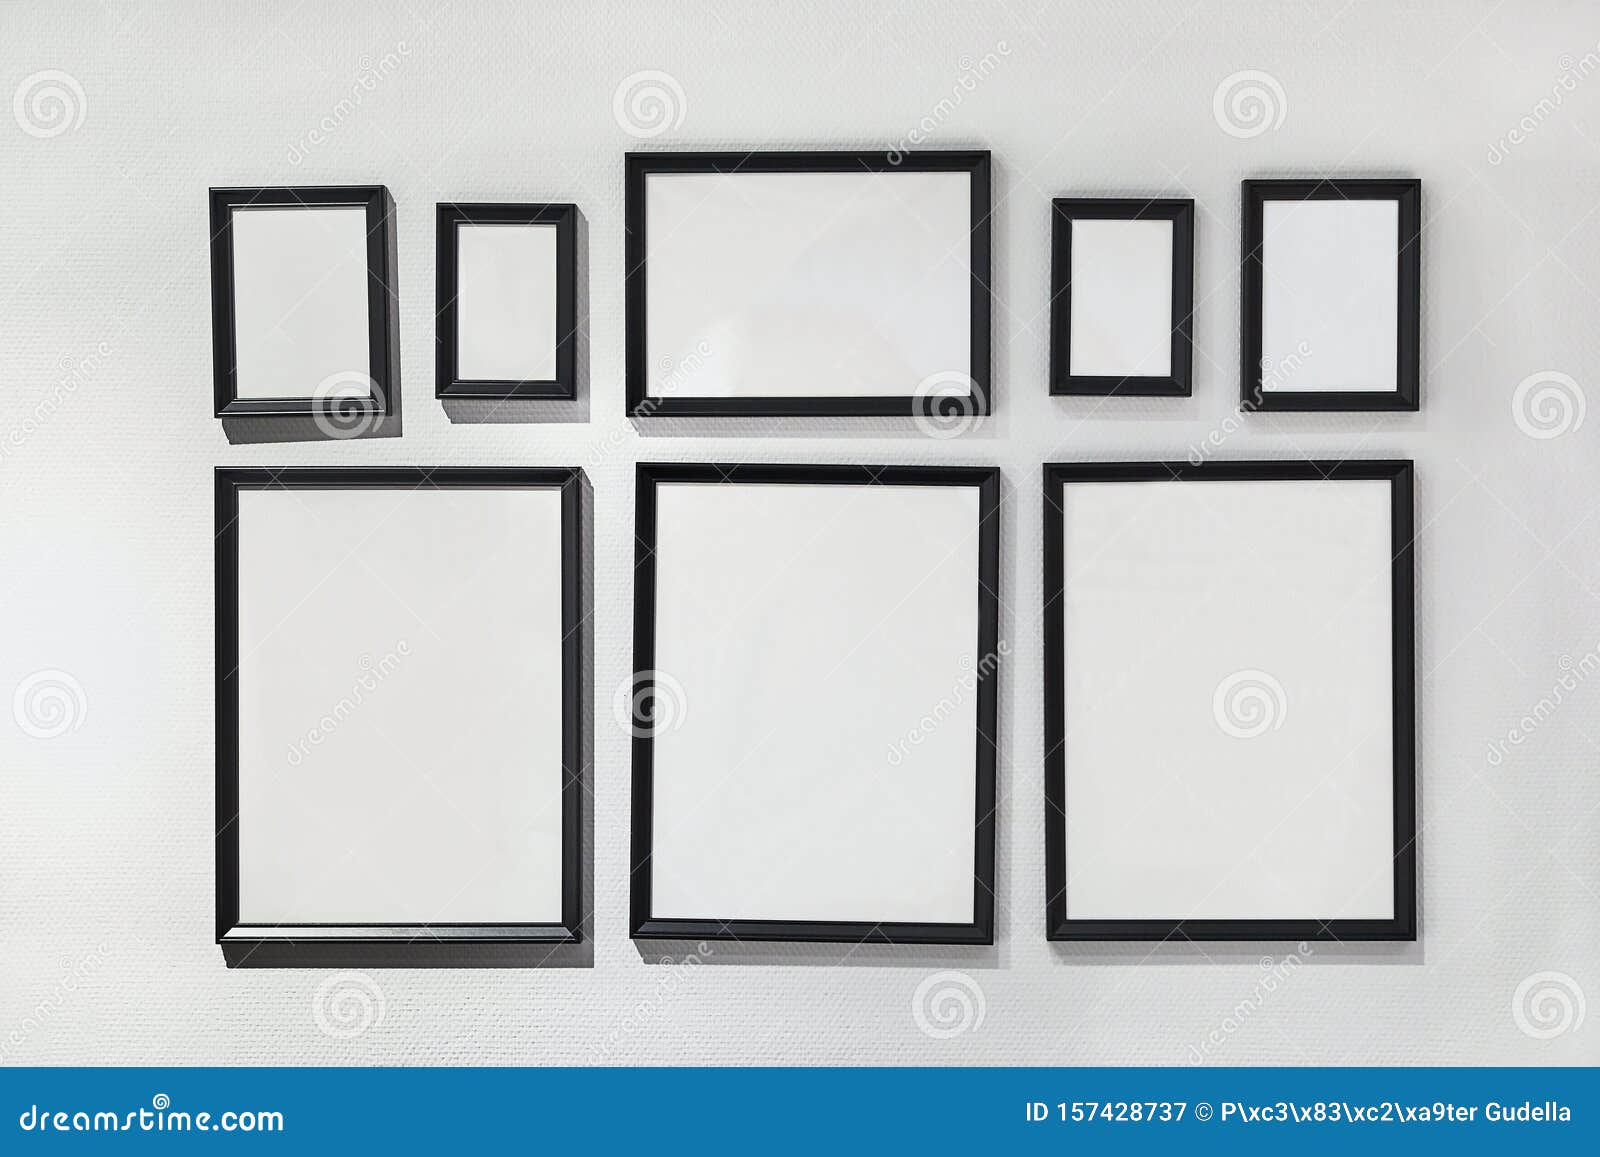 Blank Picture Frames on White Wall Stock Image - Image of framing ...